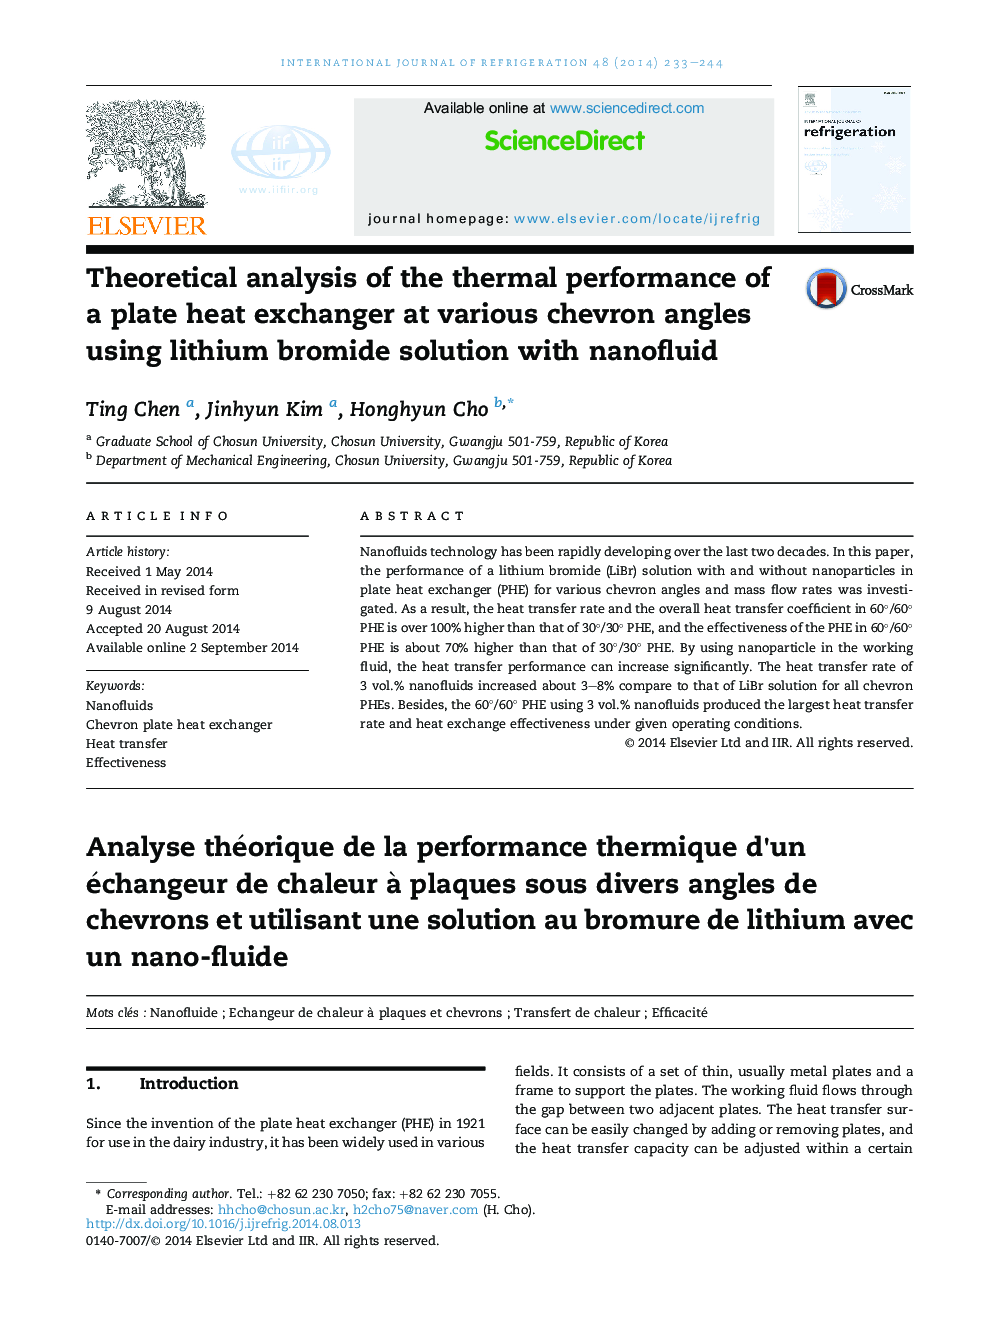 Theoretical analysis of the thermal performance of a plate heat exchanger at various chevron angles using lithium bromide solution with nanofluid